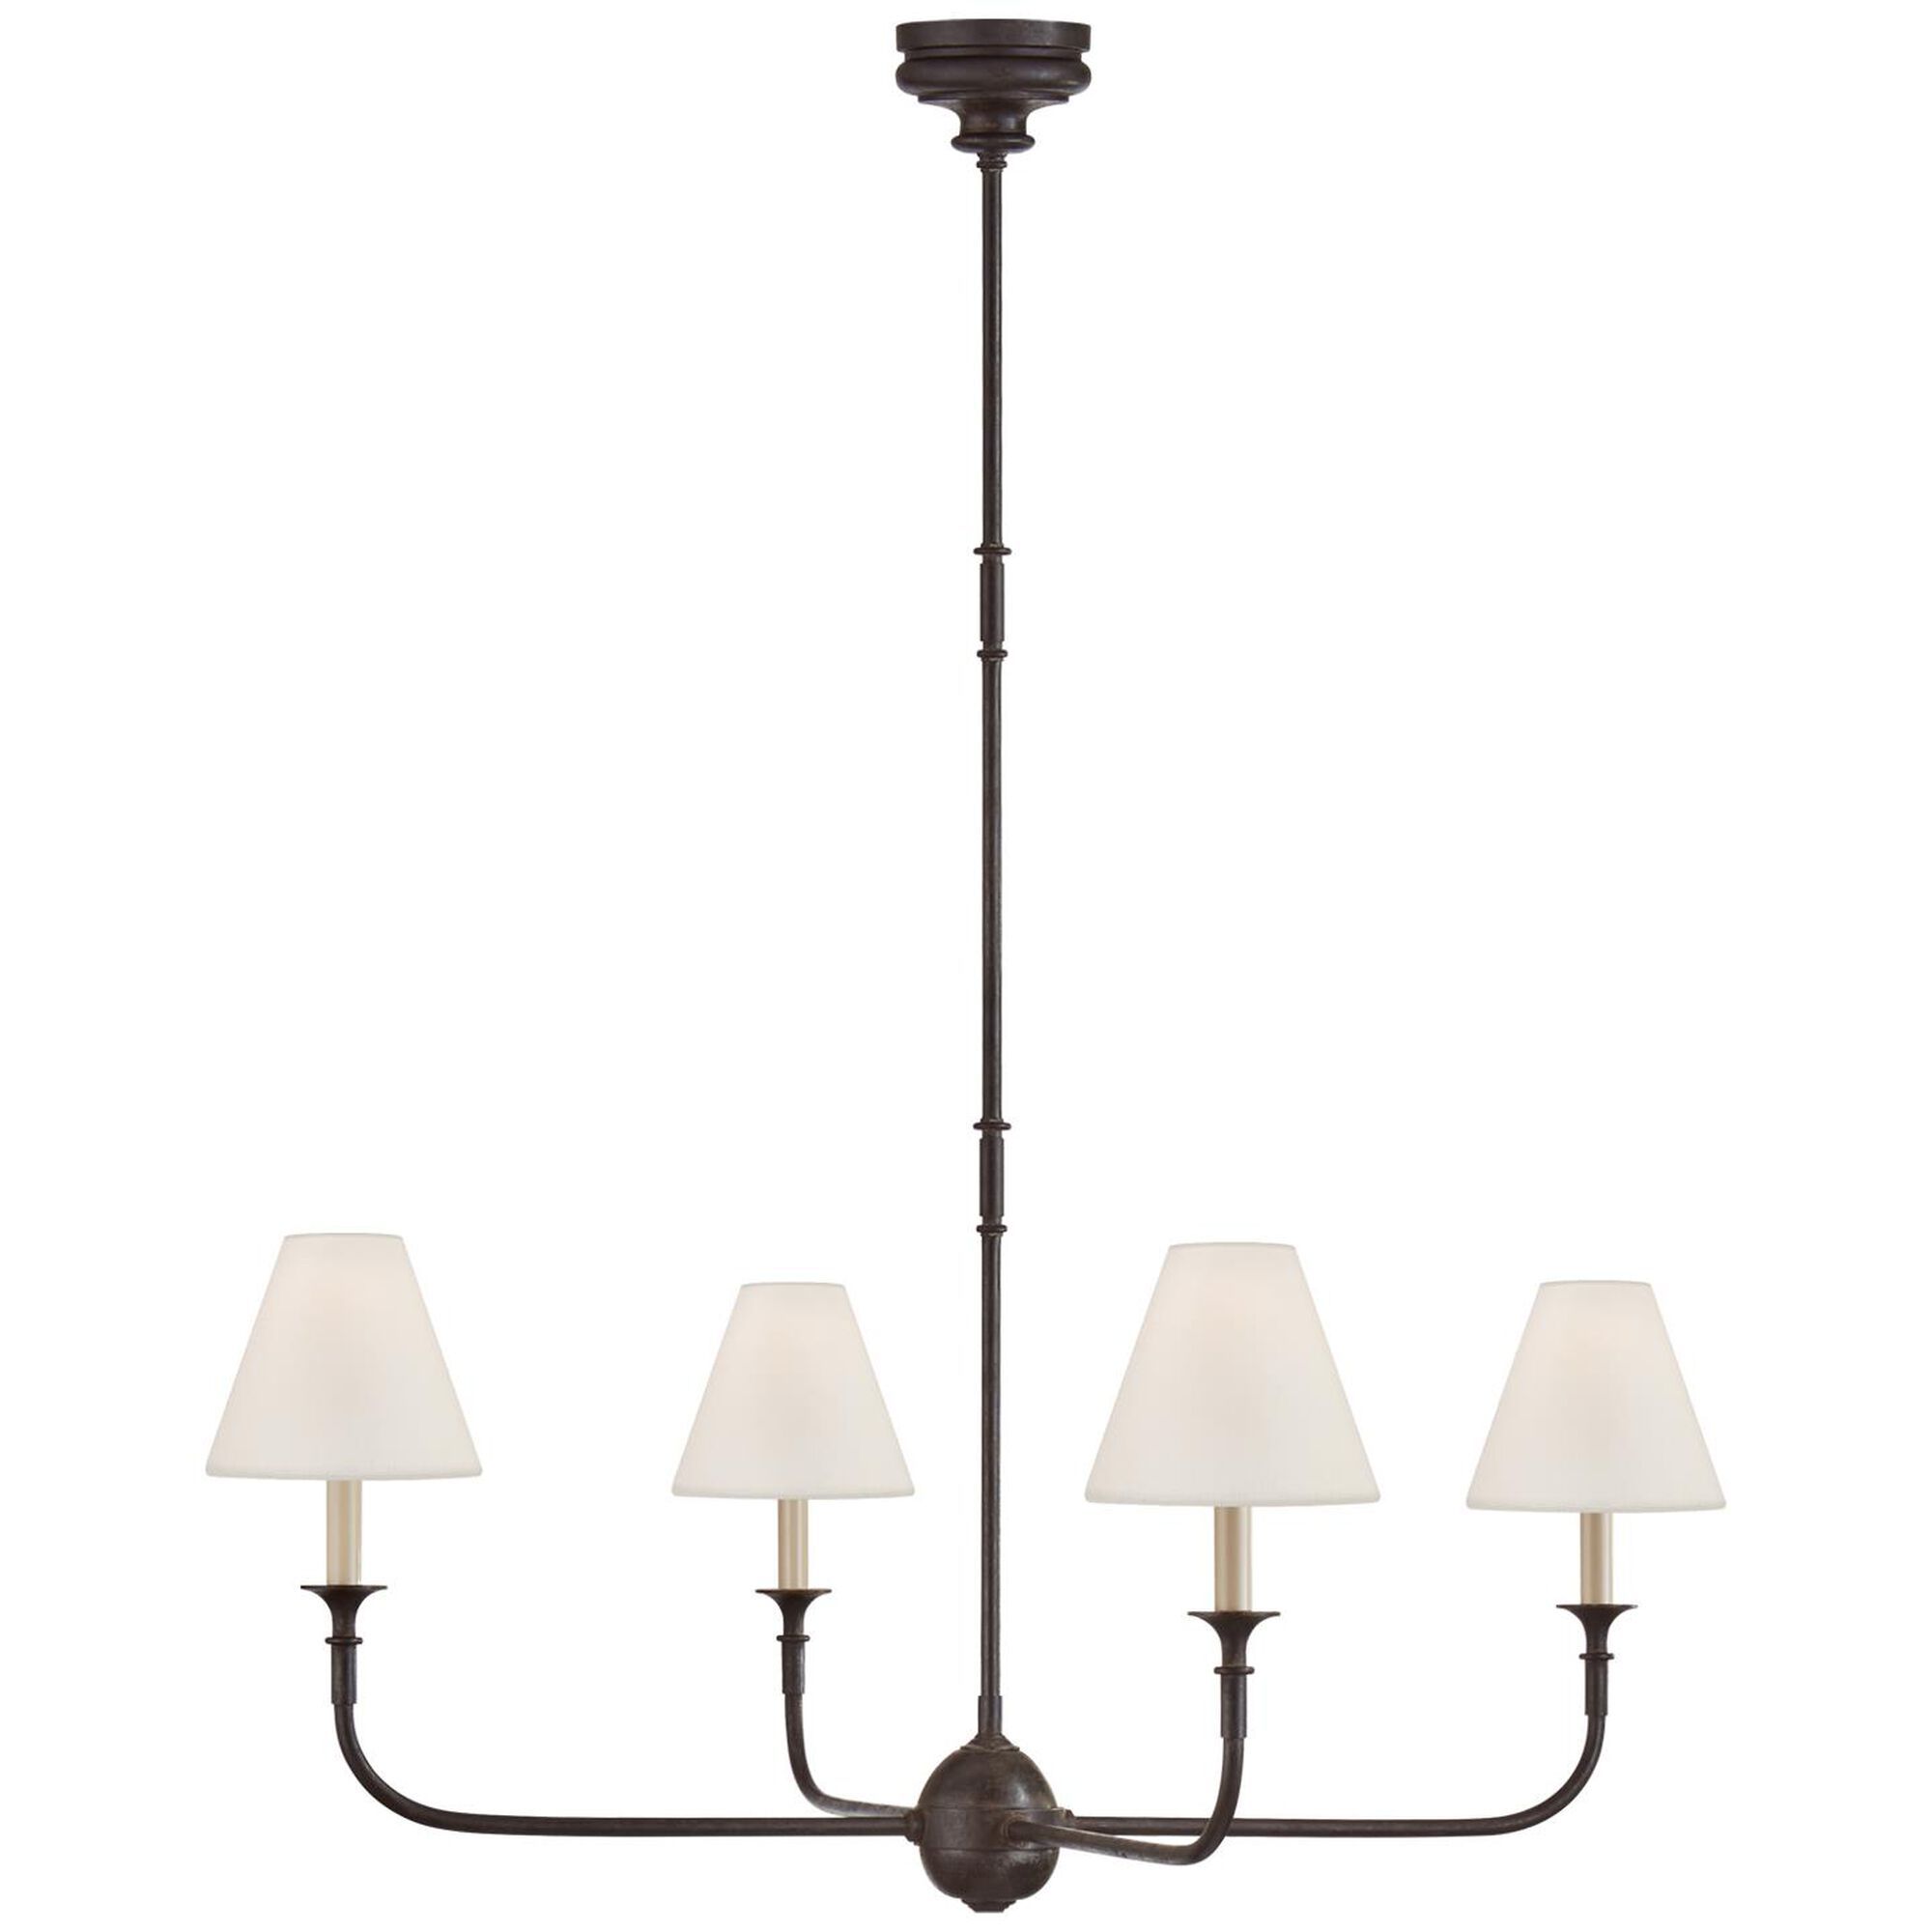 Thomas O'Brien Piaf 39 Inch 4 Light Chandelier by Visual Comfort Signature Collection | 1800 Lighting